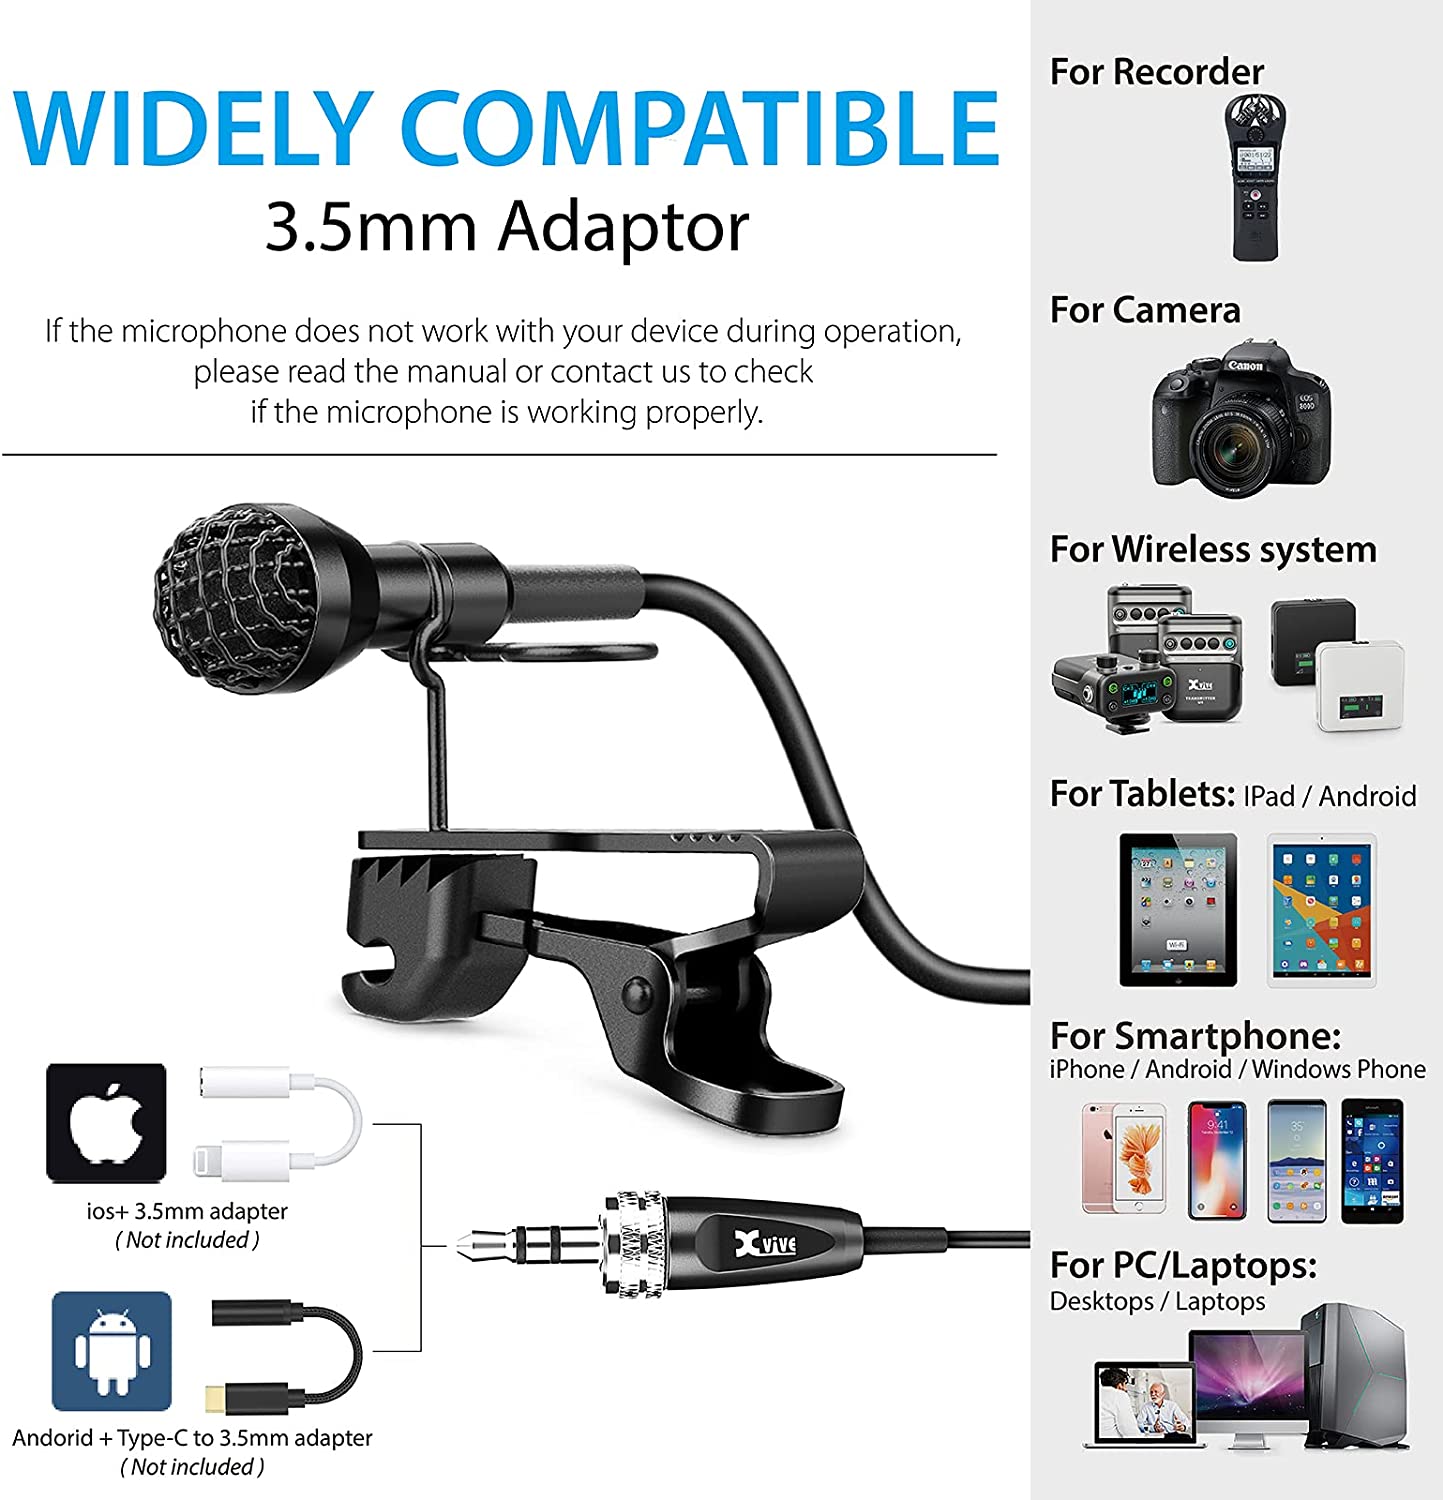 Cell　Xvive　APP,Small　Mic　Clip-On　for　Smartphone,YouTube,Conference,Recording　Device　i　Microphone　Lv1　Lavalier　Lapel　Omnidirectional　No　Professional　Microphone,No　Lav　Mircophone,3.5mm　Apple